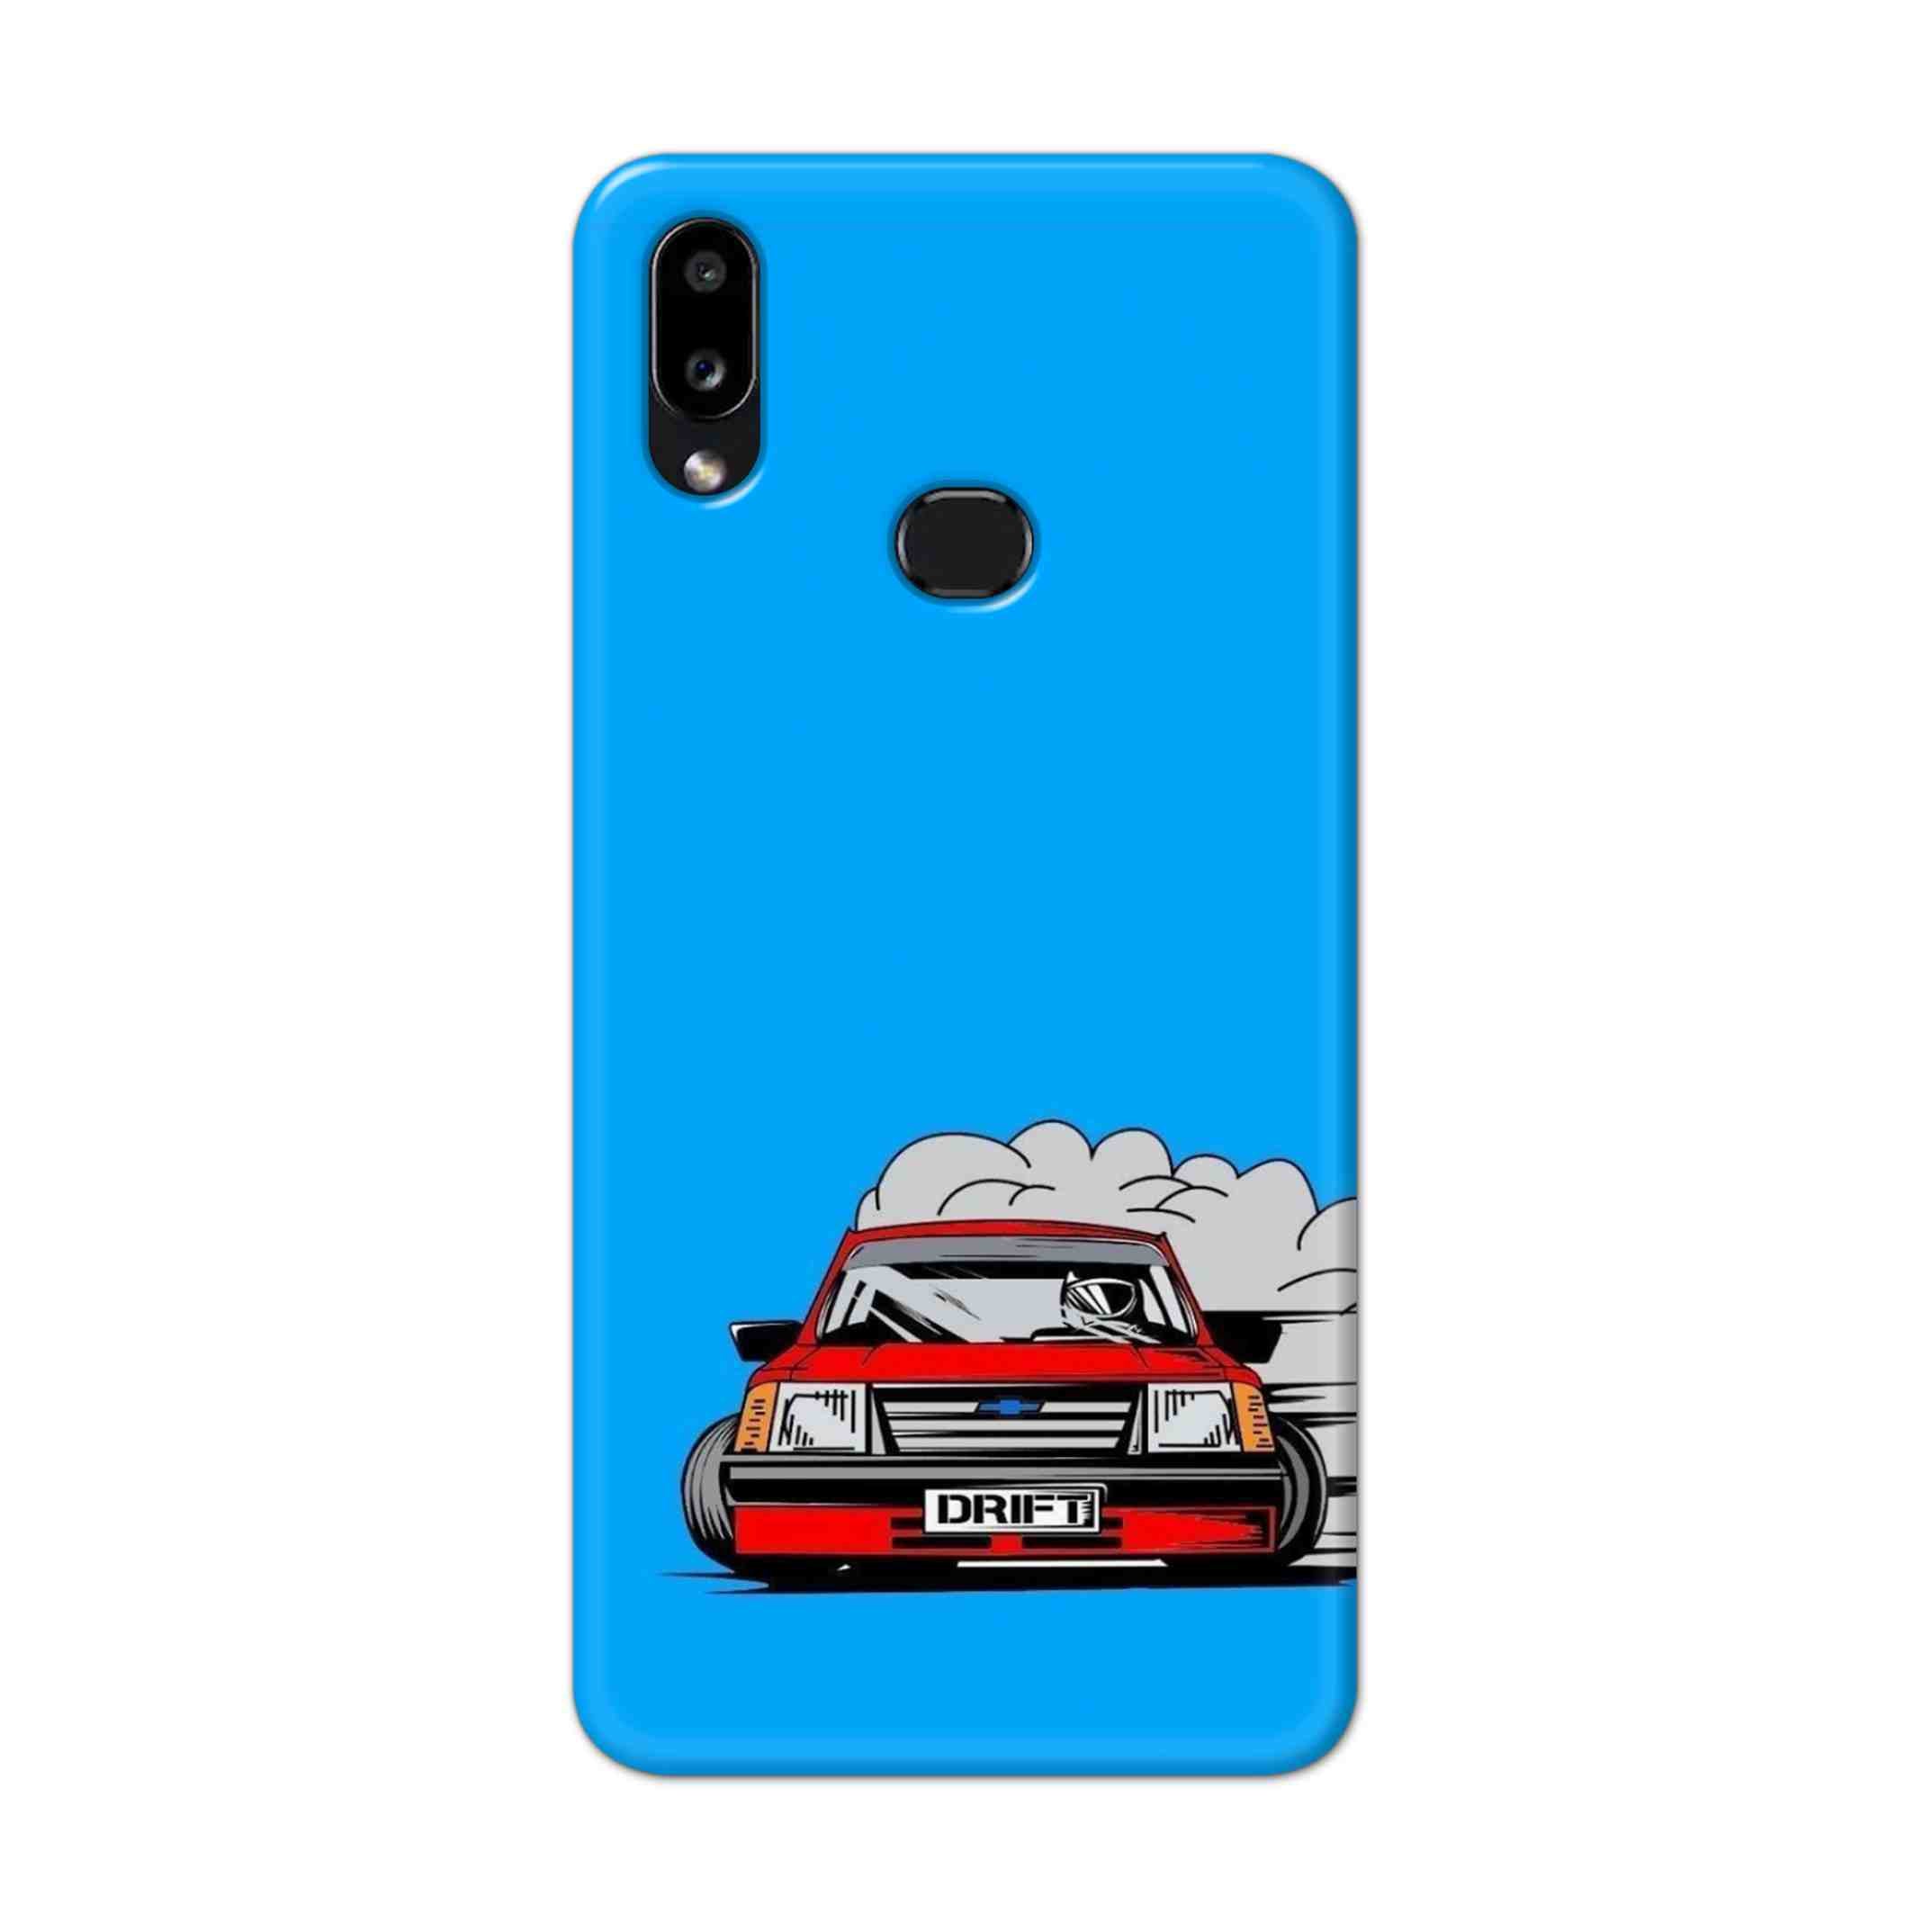 Buy Drift Hard Back Mobile Phone Case Cover For Samsung Galaxy M01s Online